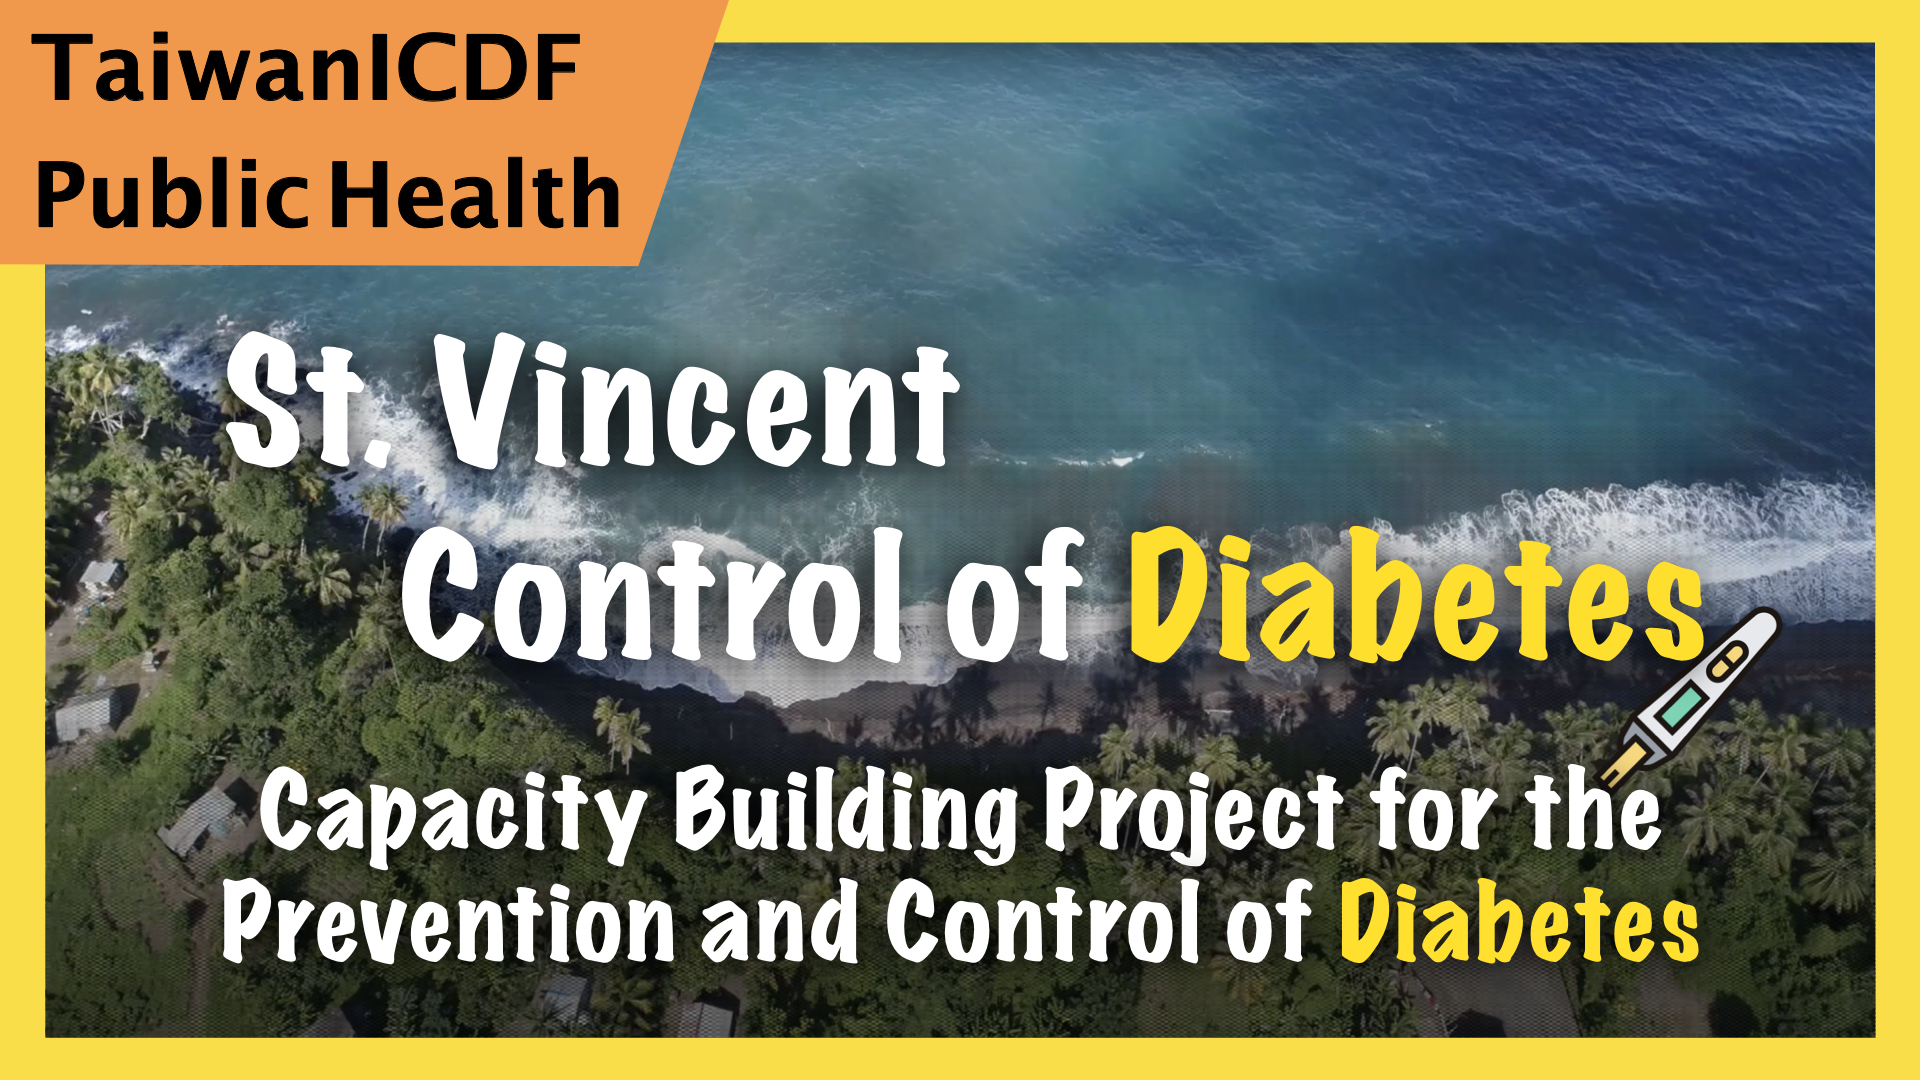 Capacity Building Project for the Prevention and Control of Diabetes in St. Vincent